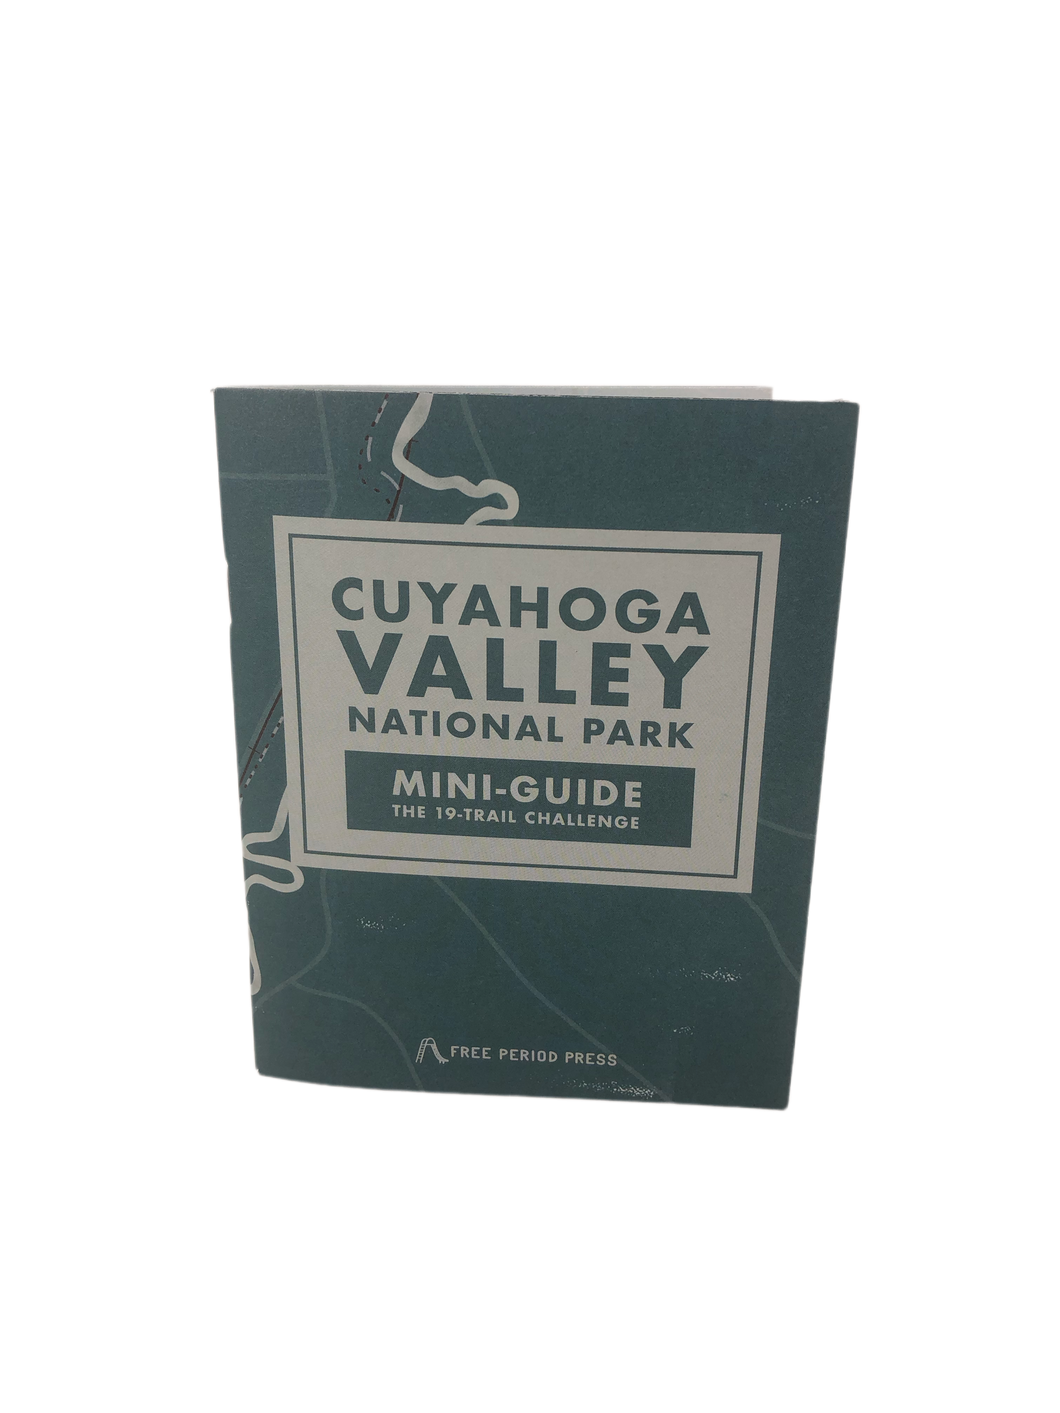 Cuyahoga Valley National Park Guide